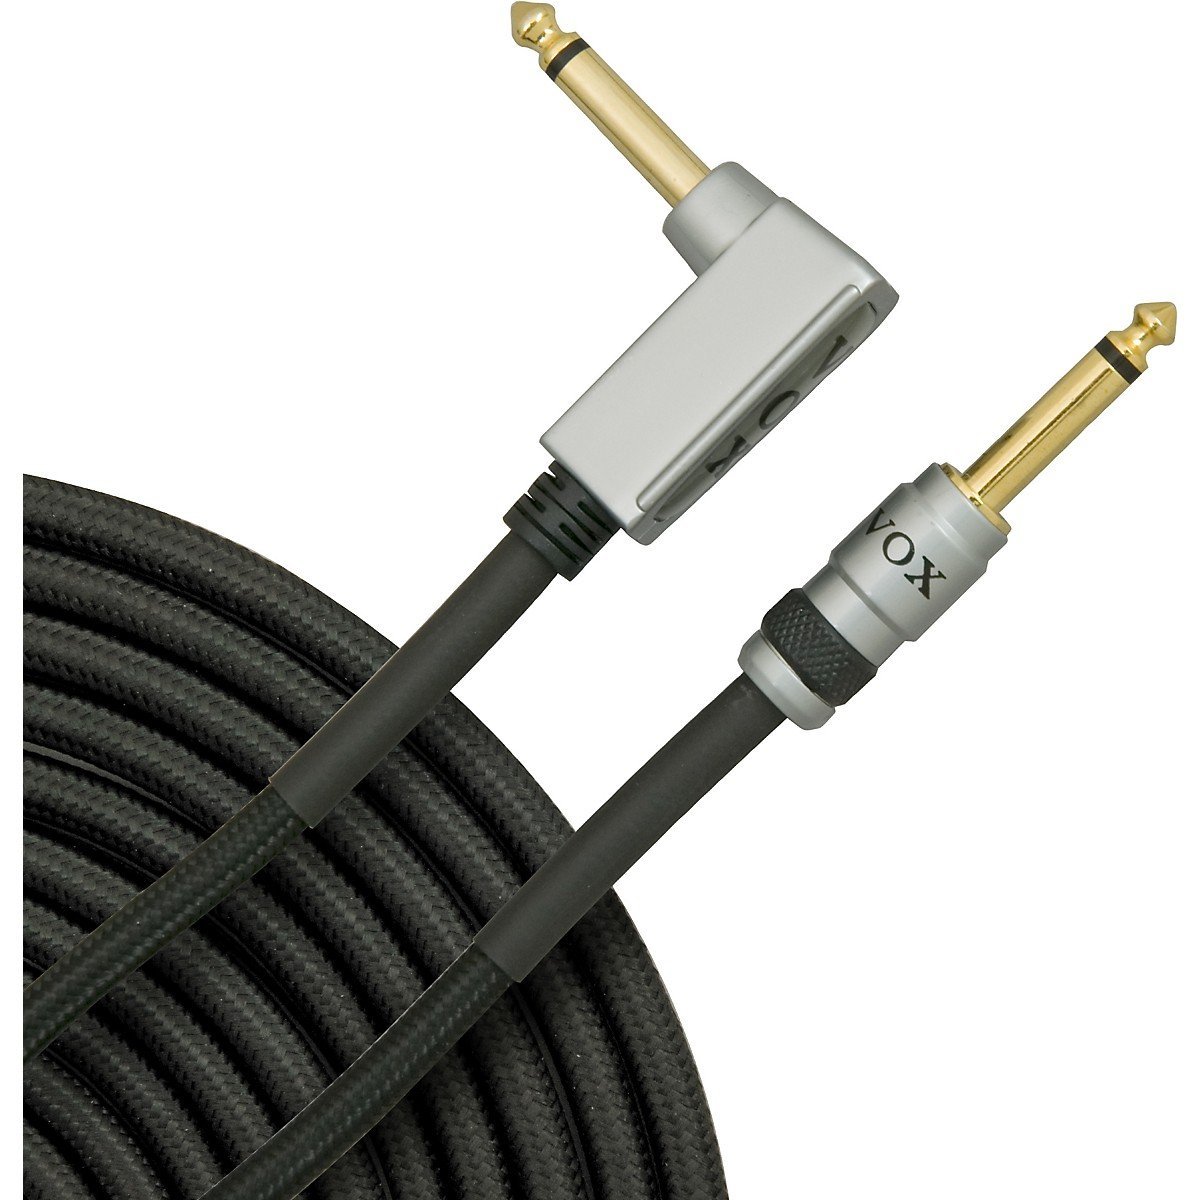 Vox Class A Professional Guitar Cable